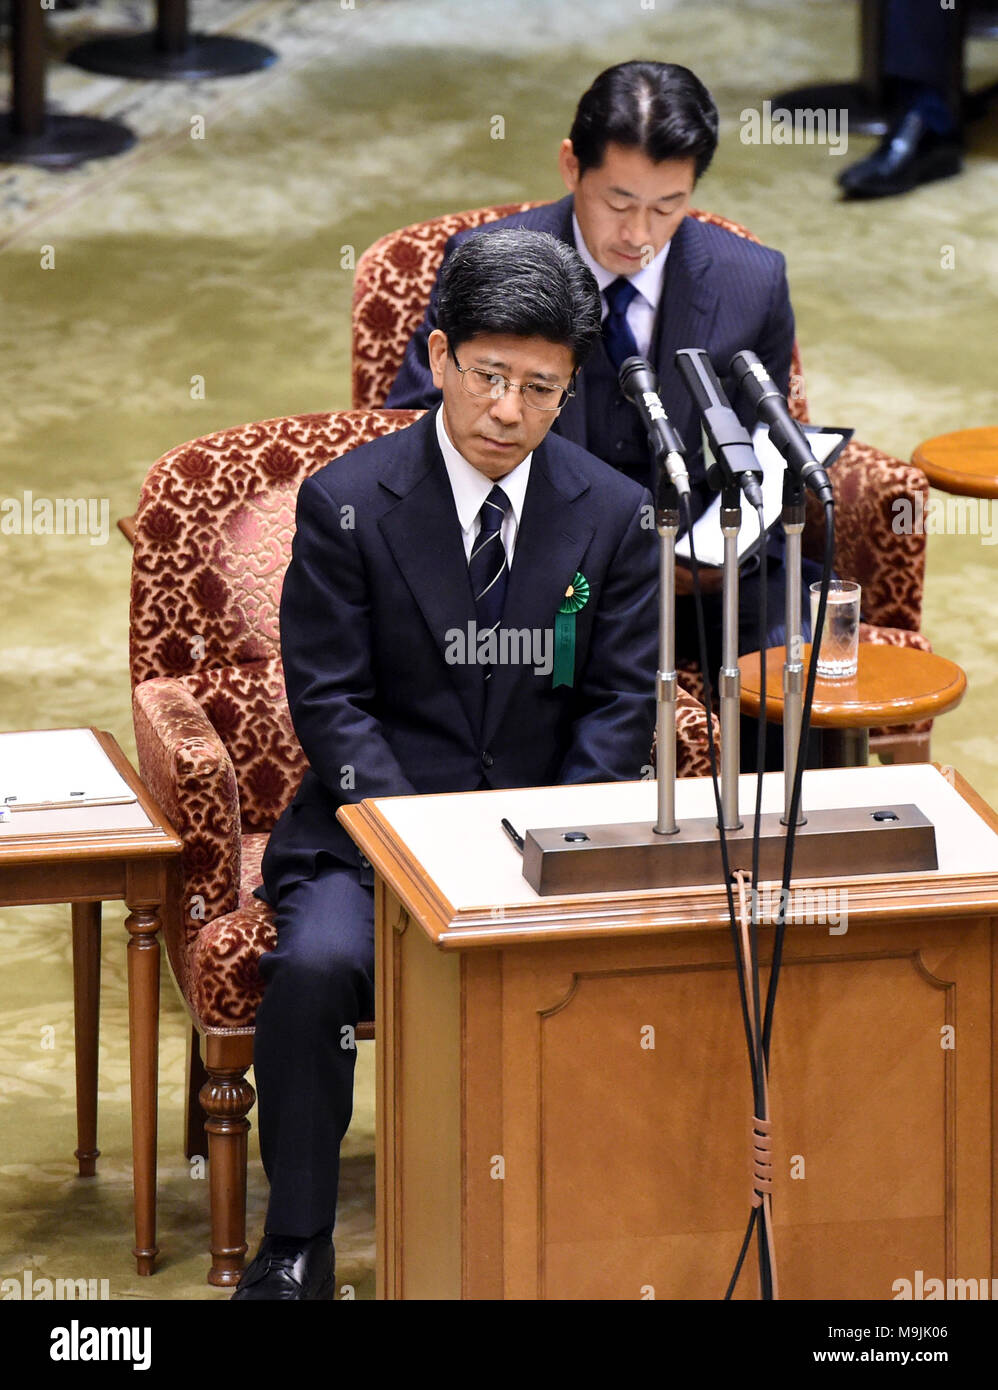 (180327) -- TOKYO, March 27, 2018 (Xinhua) -- Former head of the National Tax Agency Nobuhisa Sagawa (front) appears as a sworn witness in the Diet, Japan's bicameral legislature, in Tokyo, Japan, March 27, 2018. A key figure in a document-tampering scandal involving Japan's Finance Ministry appeared in the Diet on Tuesday to give sworn testimony over the falsification of government documents related to the heavily discounted sale of state land to a nationalist school operator. Former national tax agency head Nobuhisa Sagawa, who was previously in charge of taking care of the land sale, steppe Stock Photo